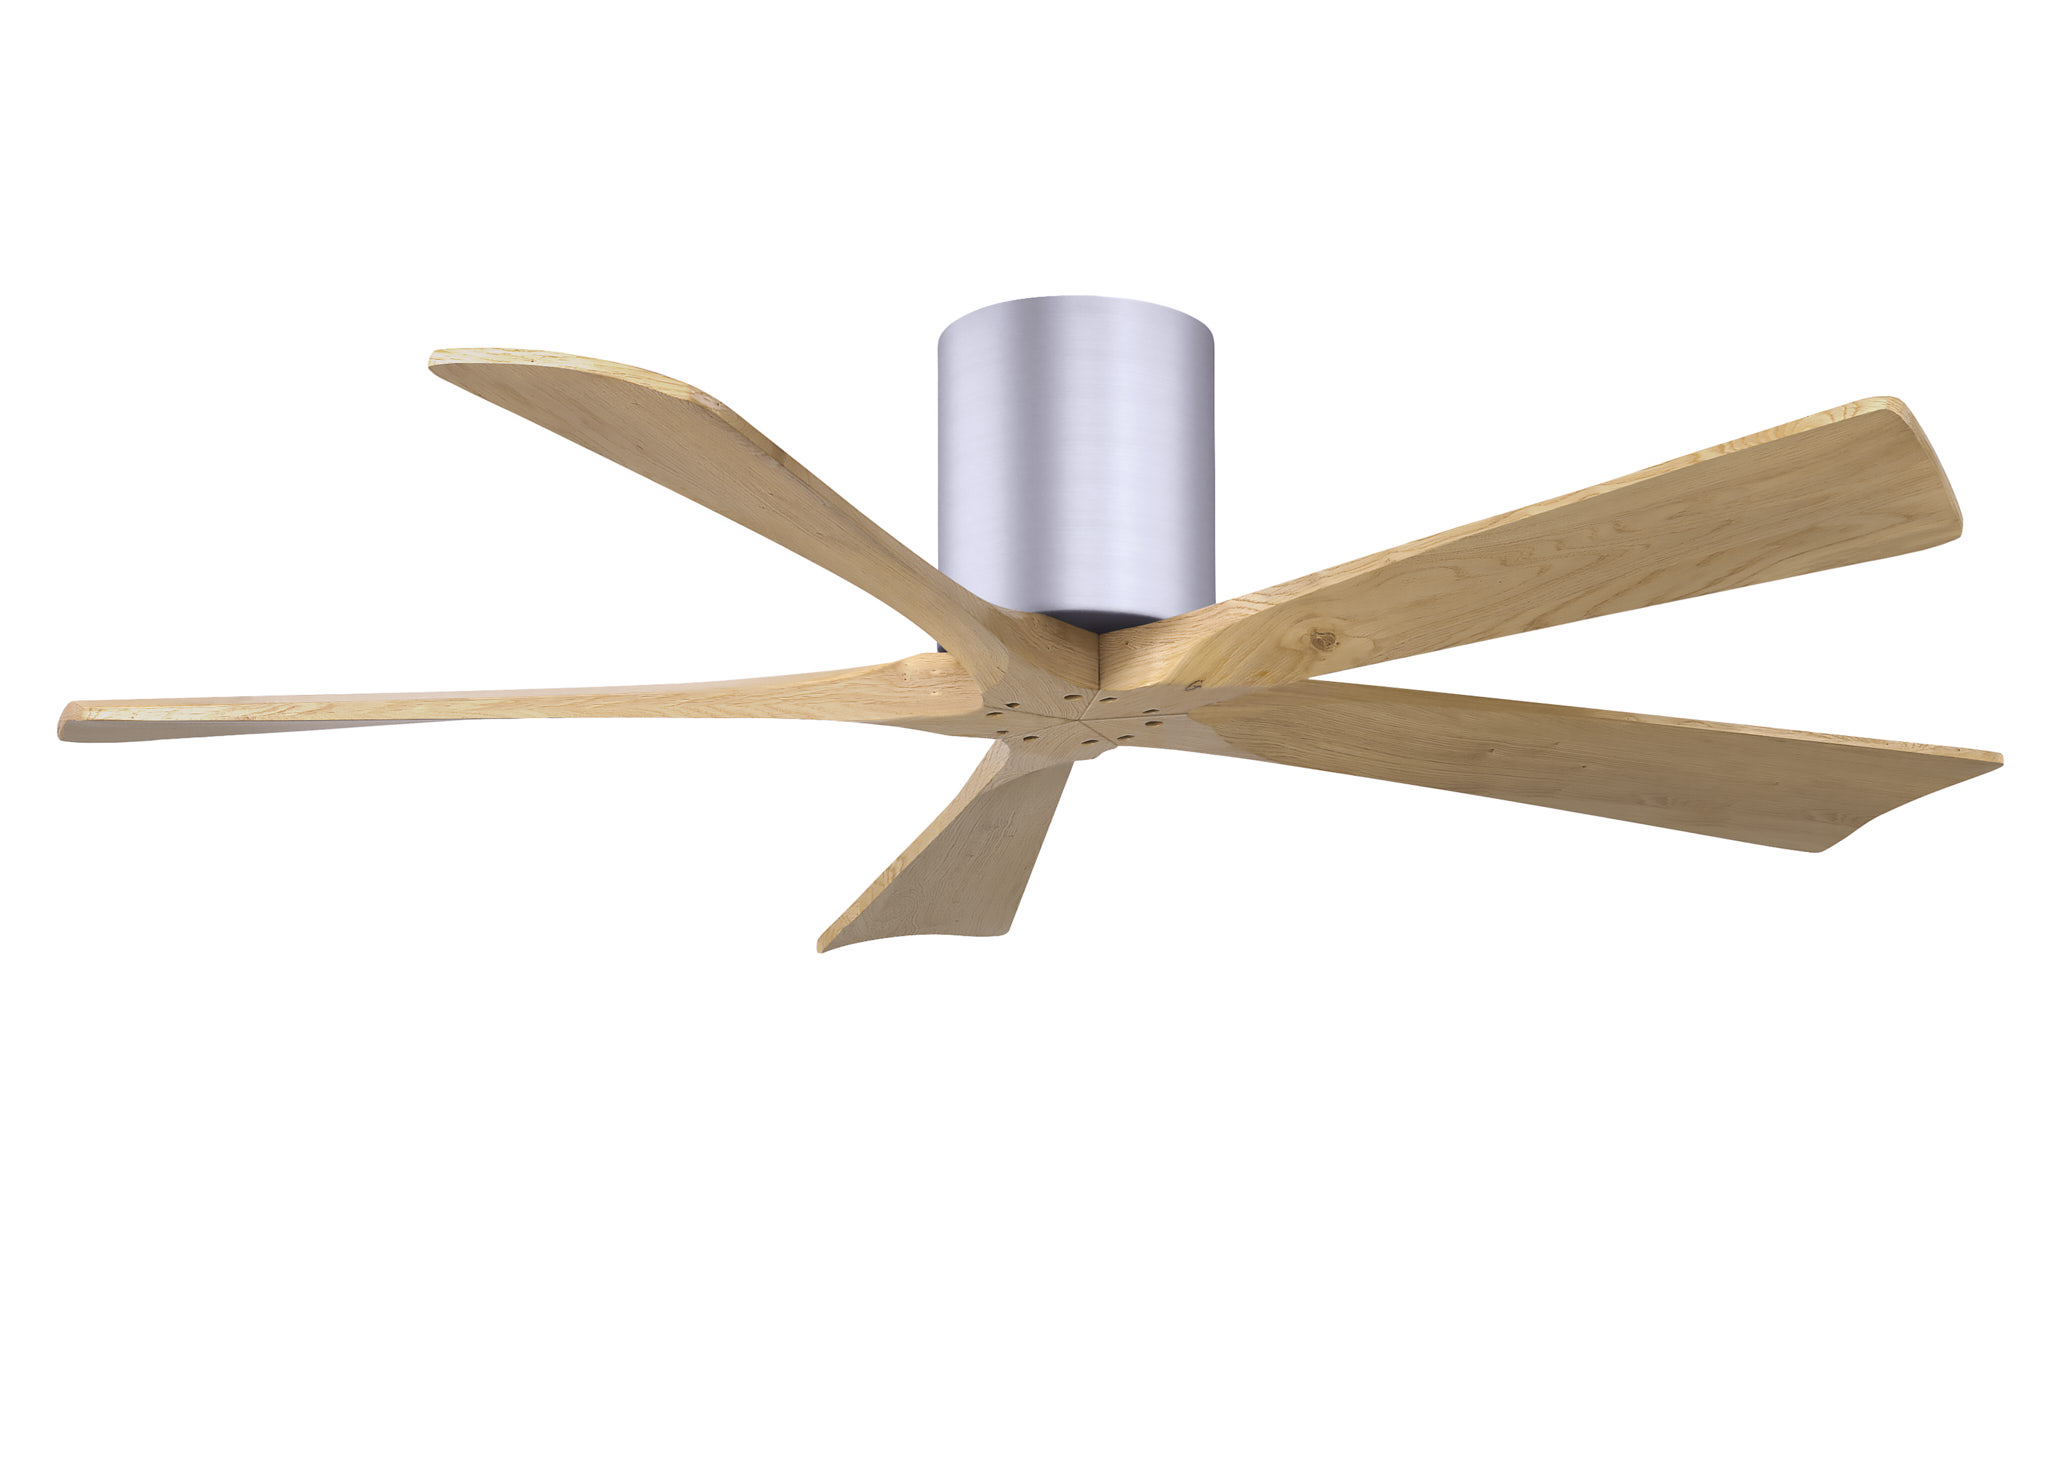 Irene-5H 6-speed ceiling fan in brushed nickel finish with 52